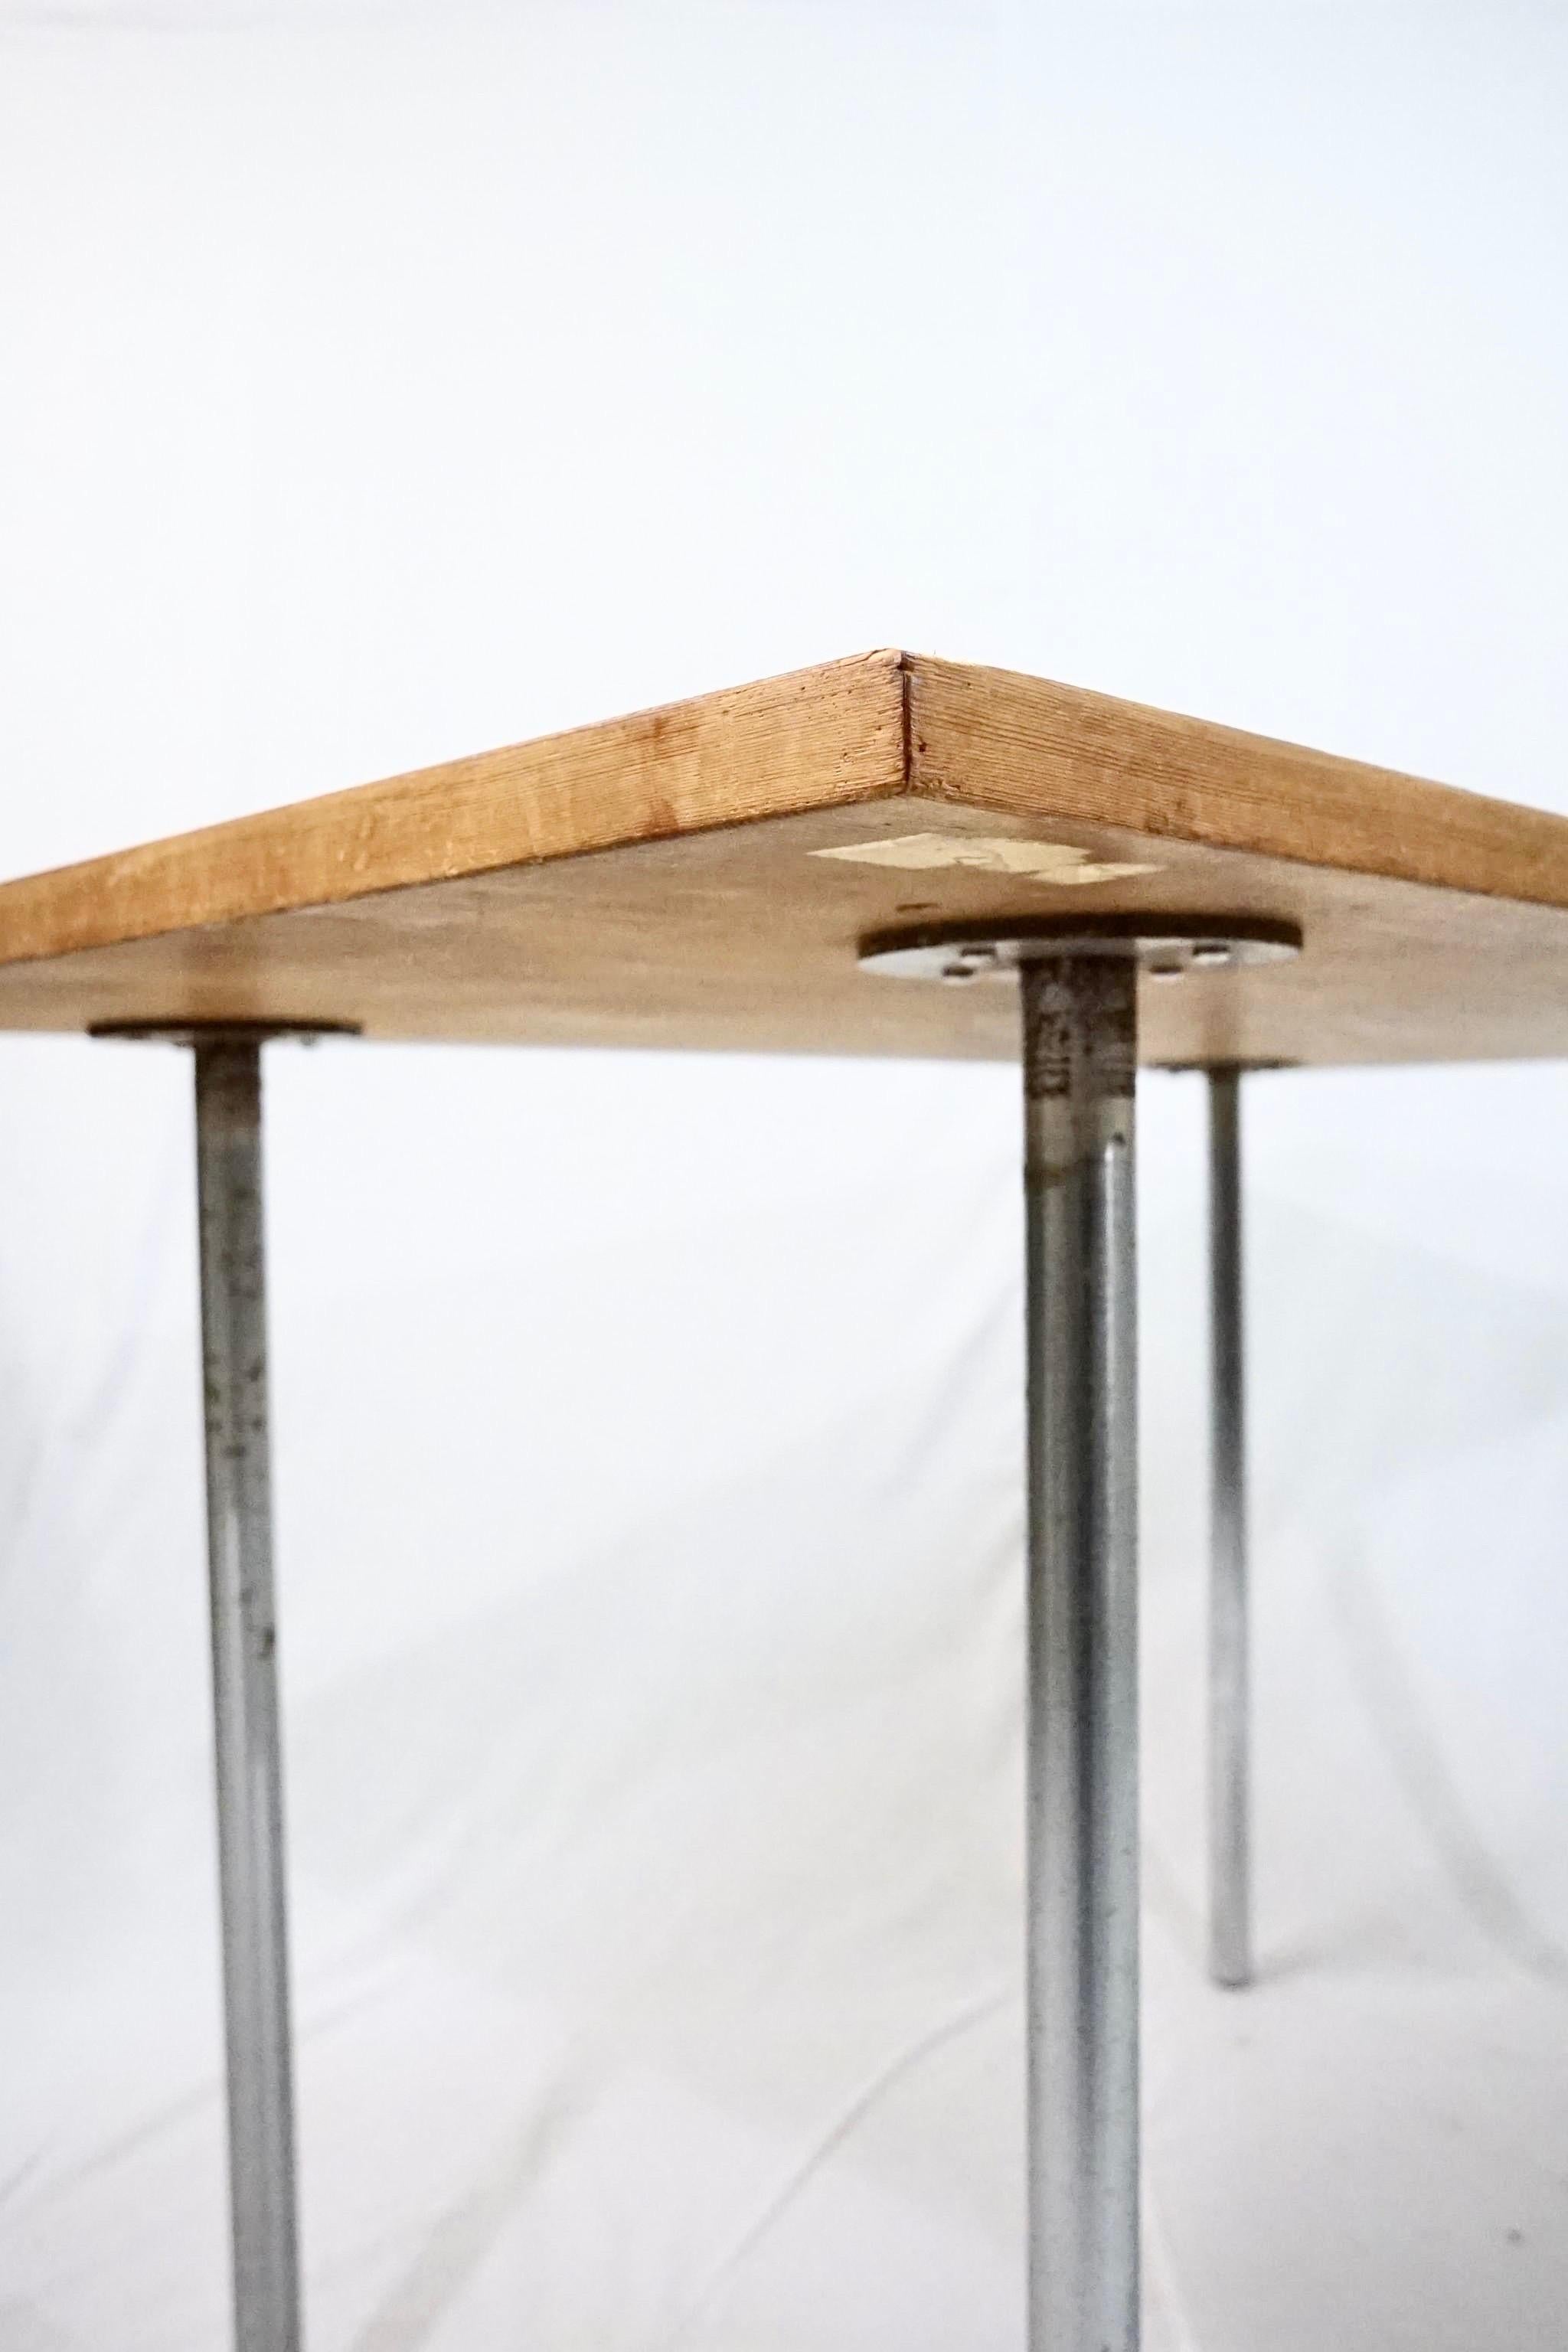 Rare Poul Kjærholm PK41 dining table in Oregon pine with tubular steel legs manufactured by E Kold Christensen.
The table is designed by danish designer Poul Kjærholm in the 1950’s and manufactured by E Kold Christensen who manufactured most of